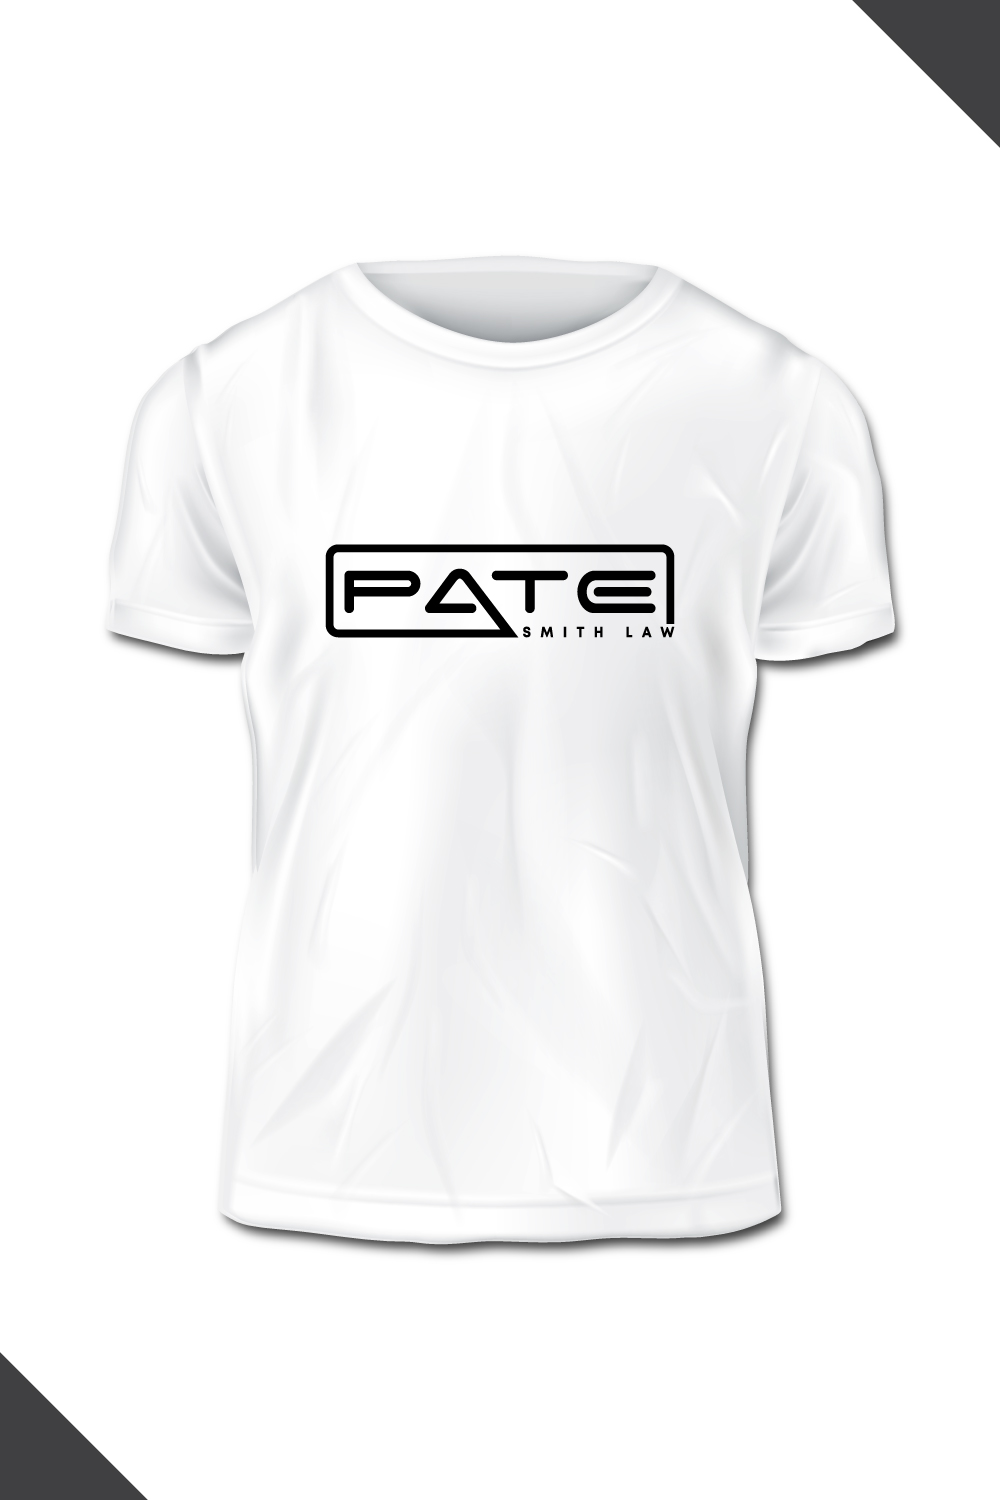 Pate logo pinterest preview image.